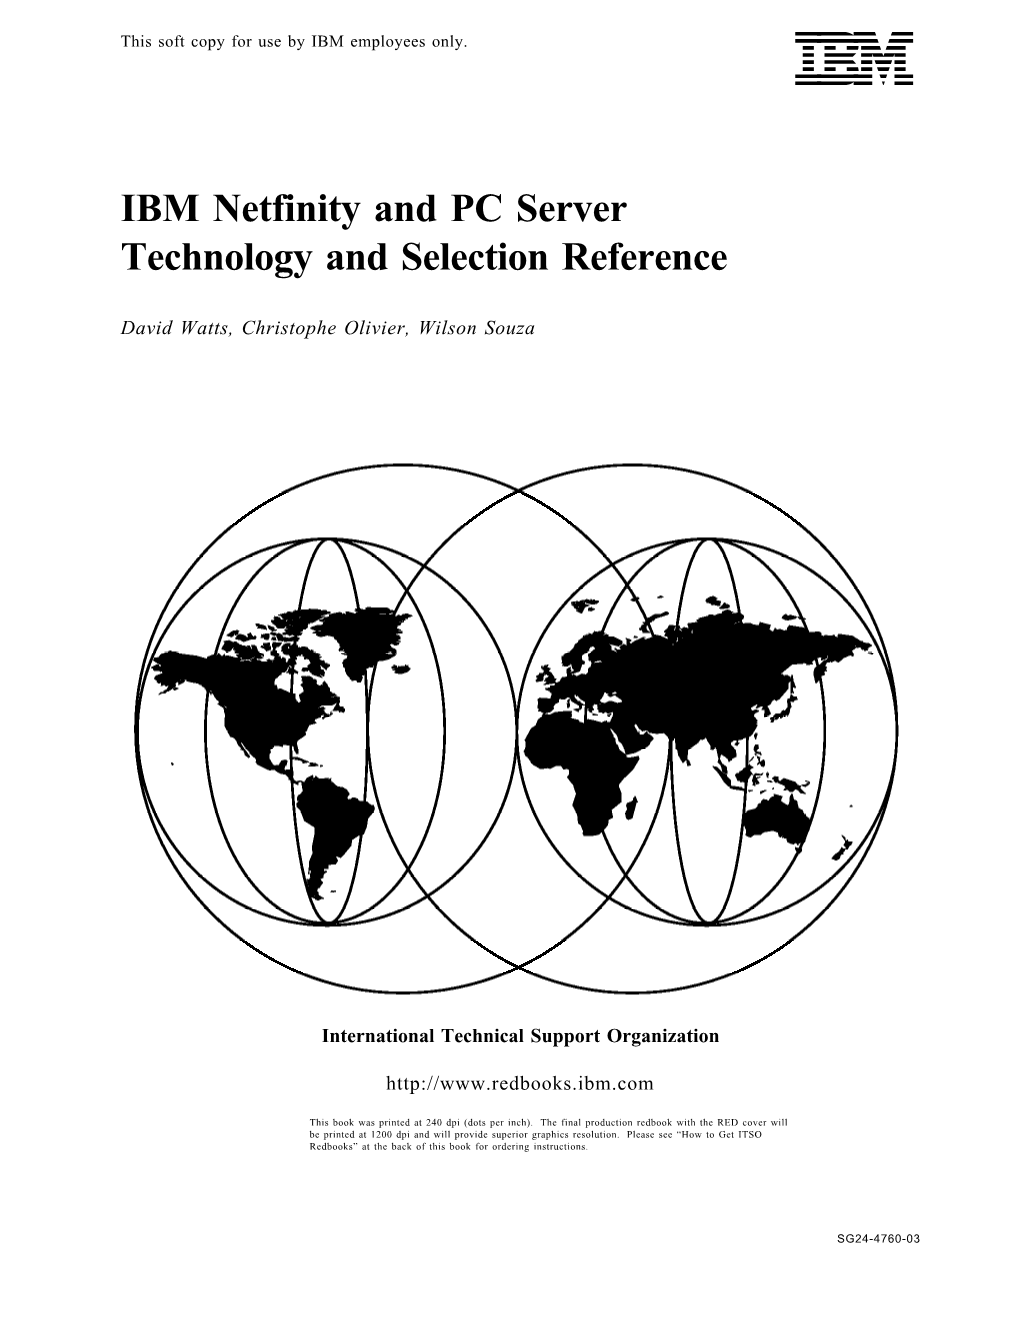 IBM Netfinity and PC Server Technology and Selection Reference